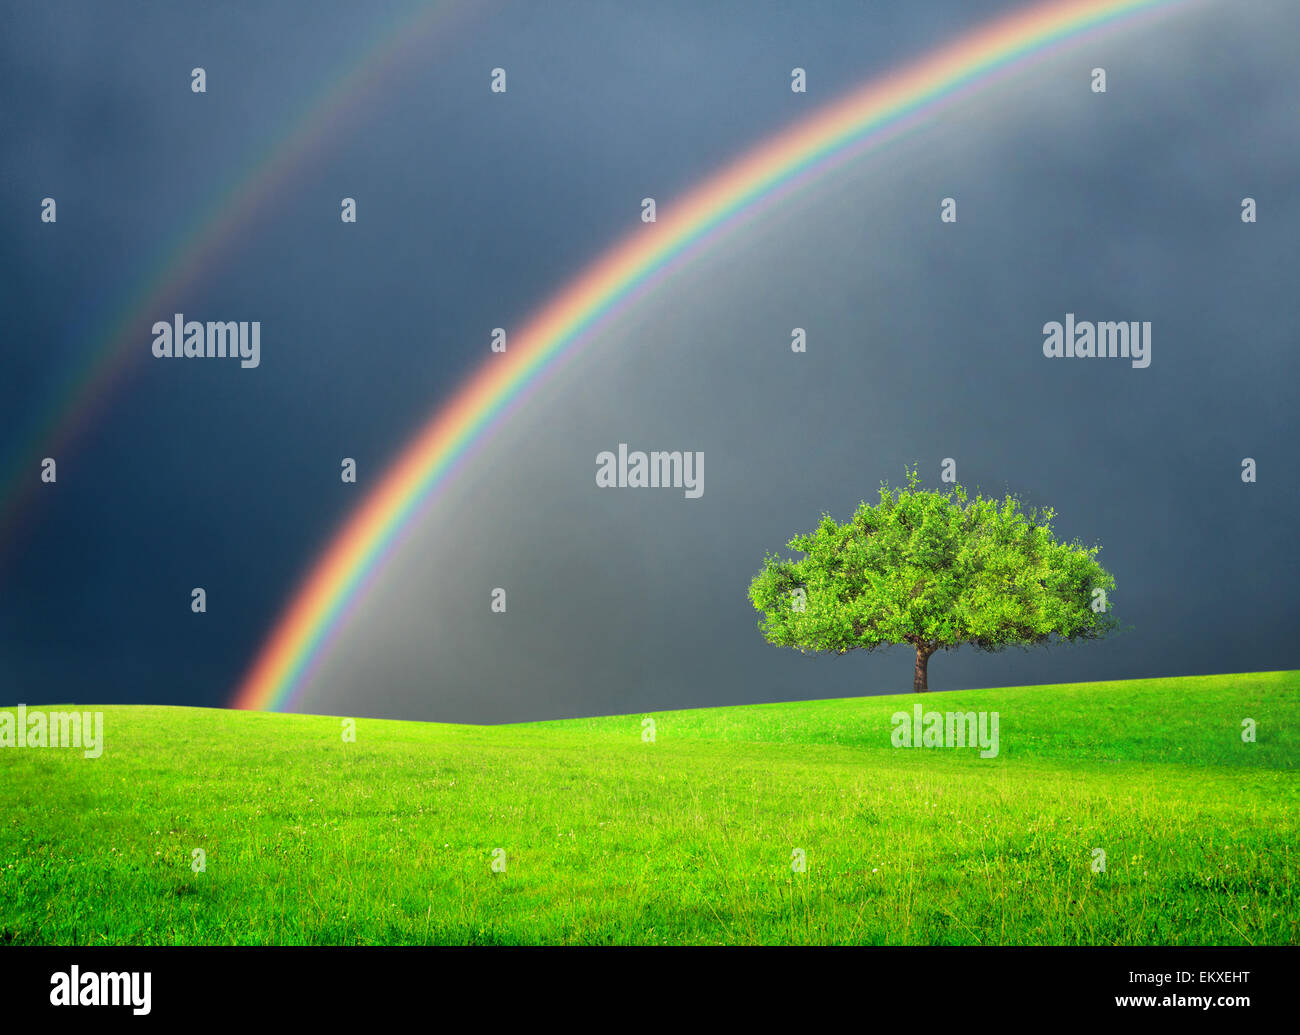 Green field with tree and double rainbow Stock Photo